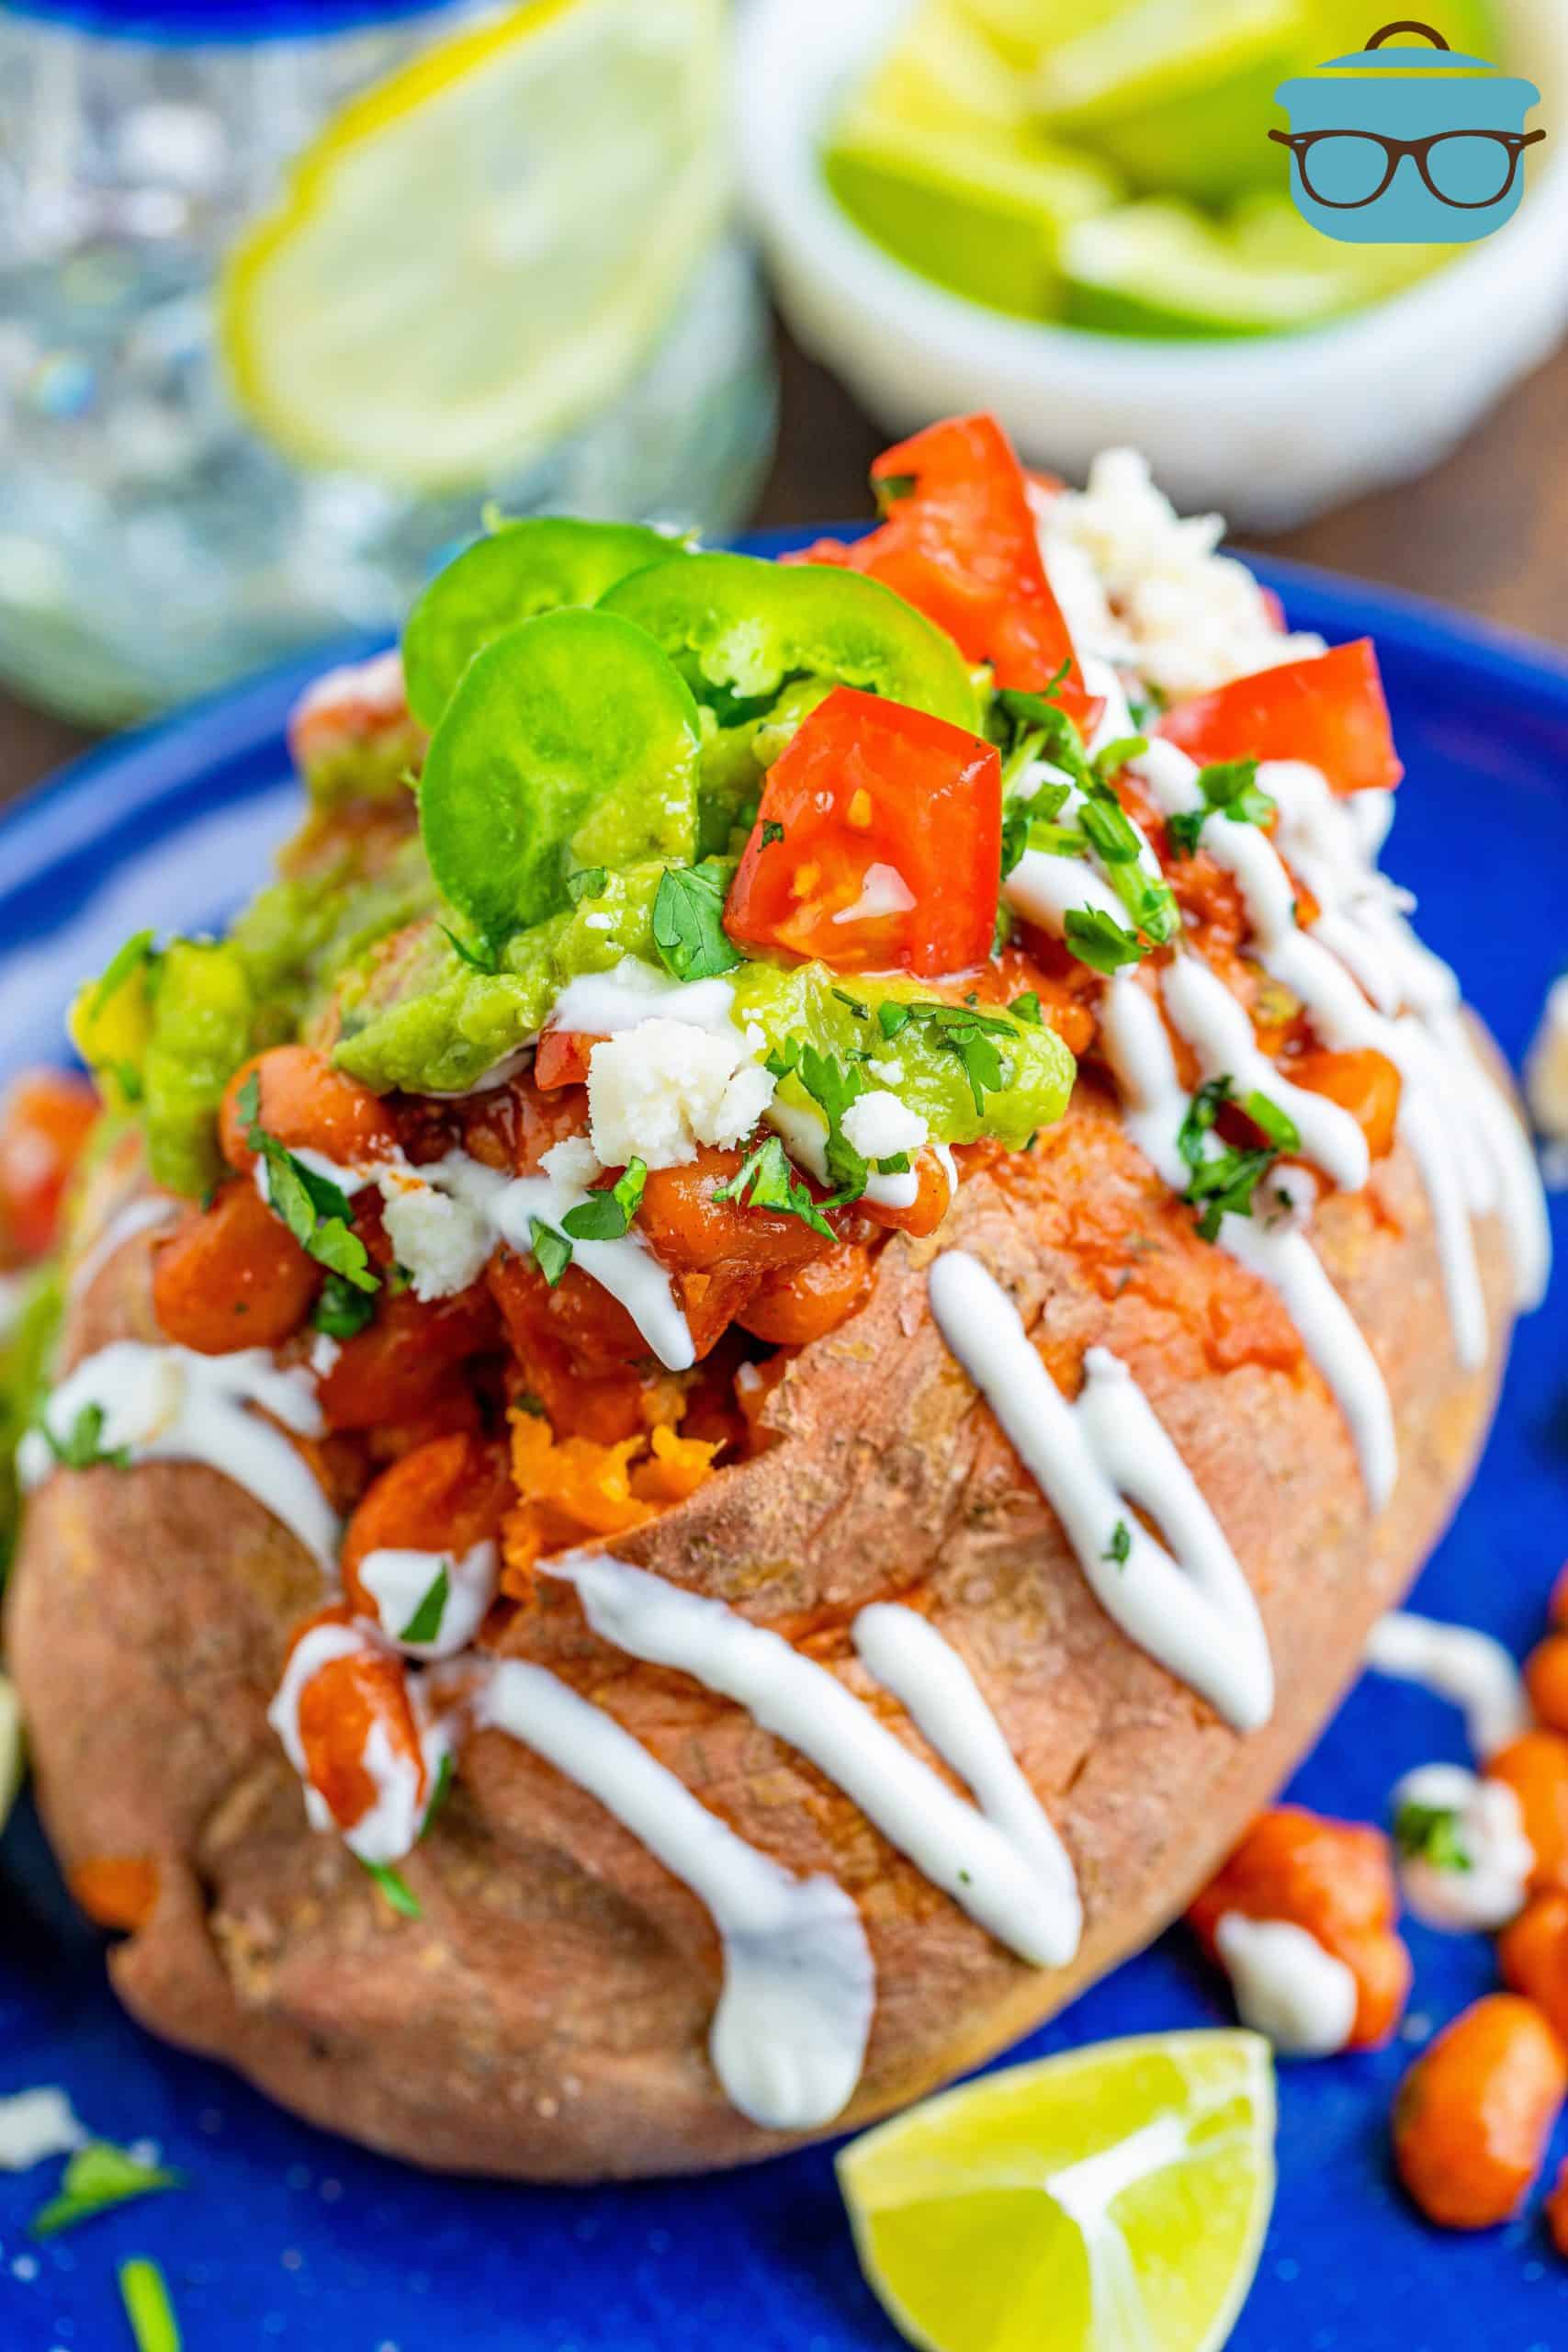 bean stuffed sweet potatoes topped with sour cream, guacamole, diced tomatoes and guacamole.